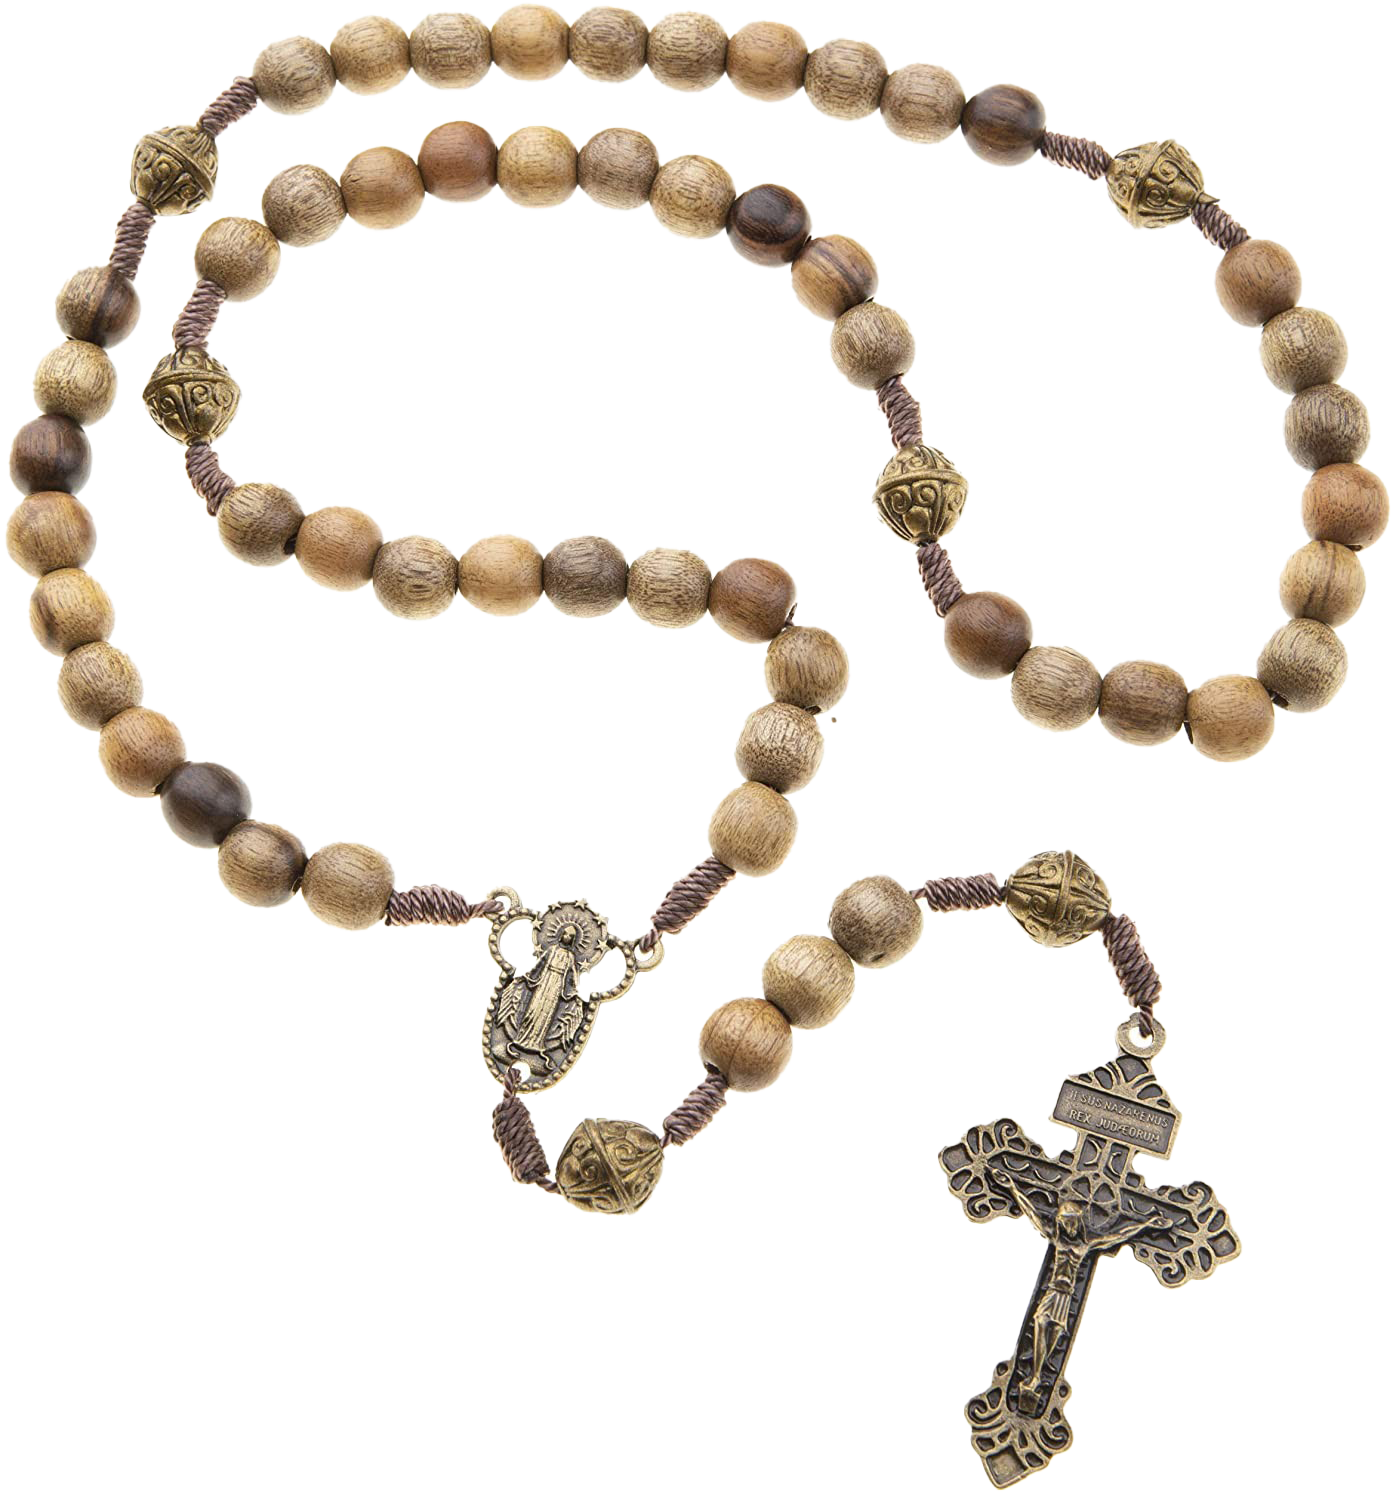 Rosary Beads PNG High-Quality Image